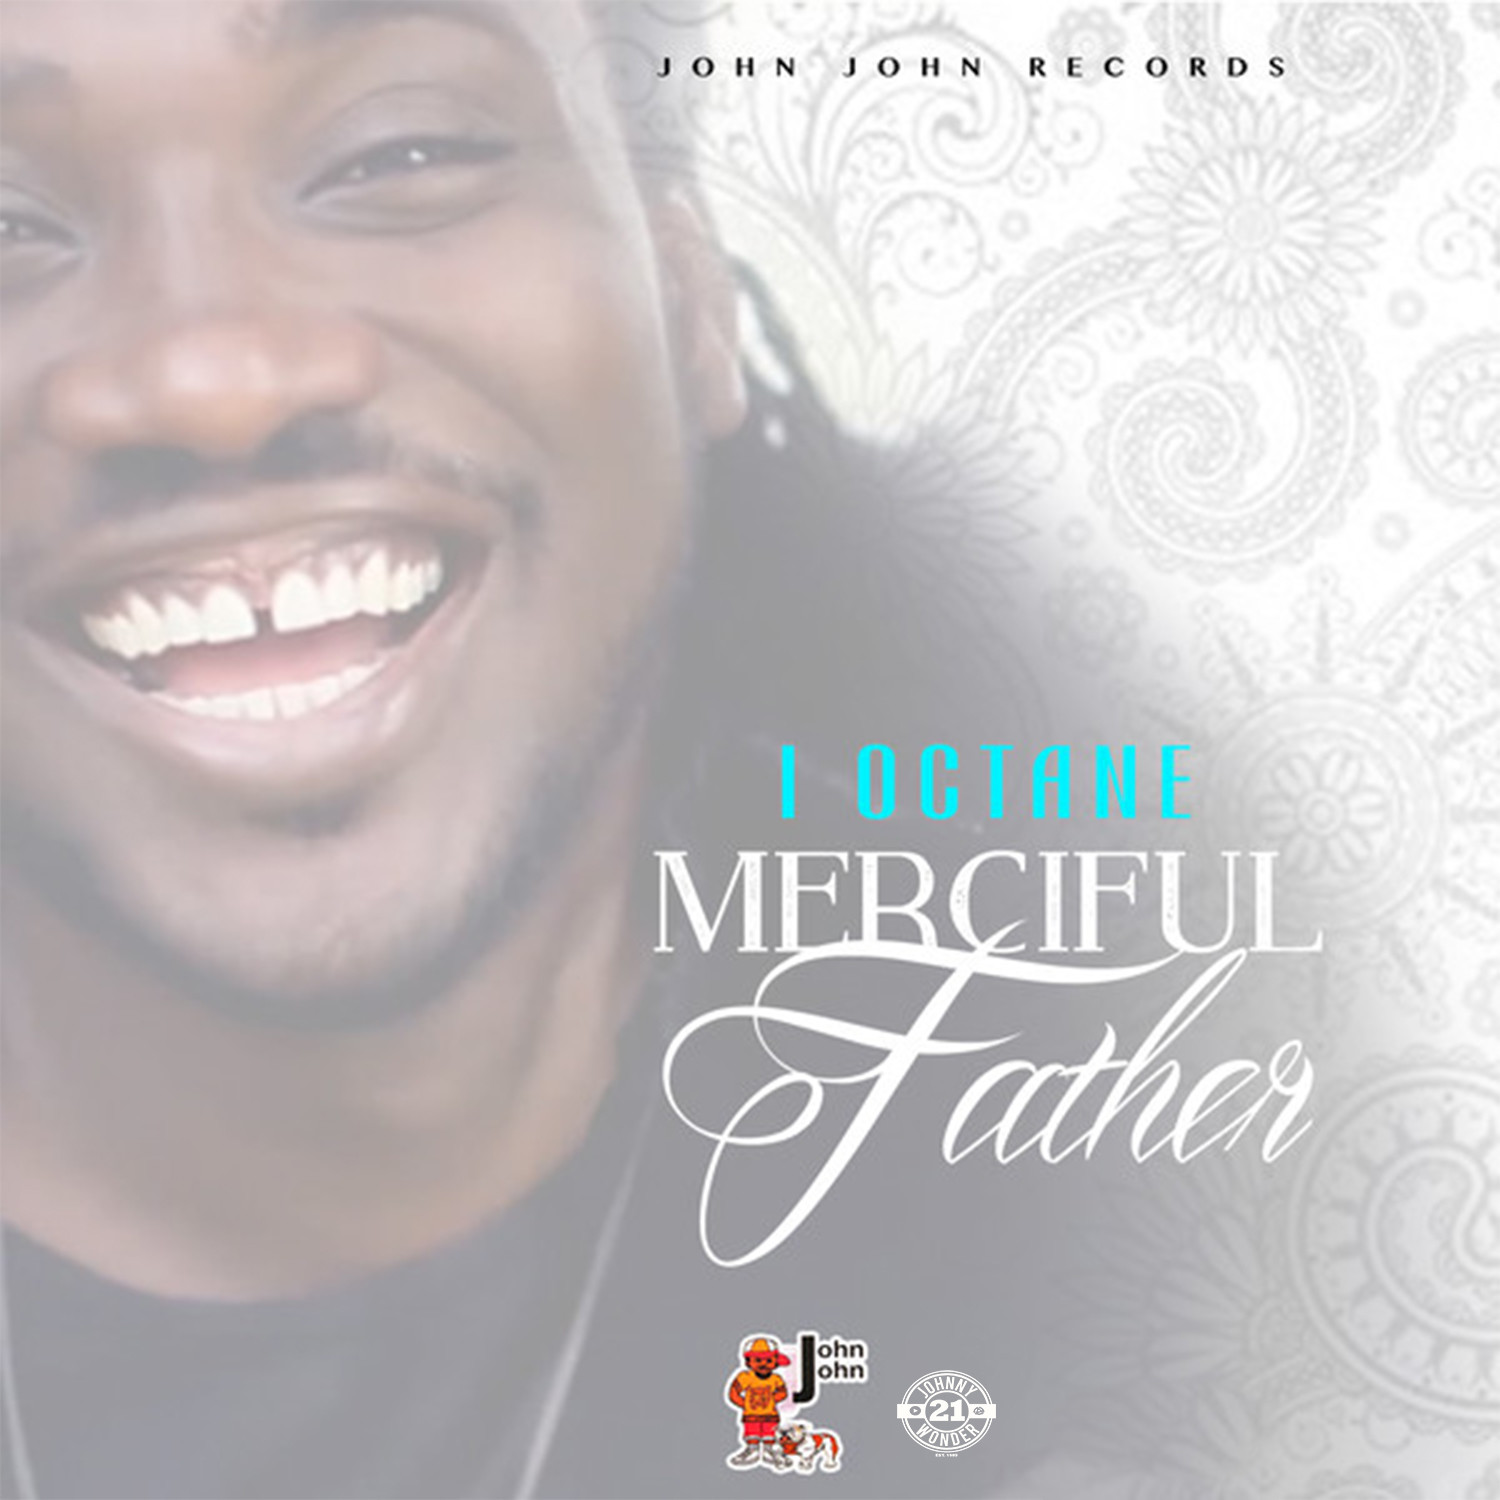 Merciful Father